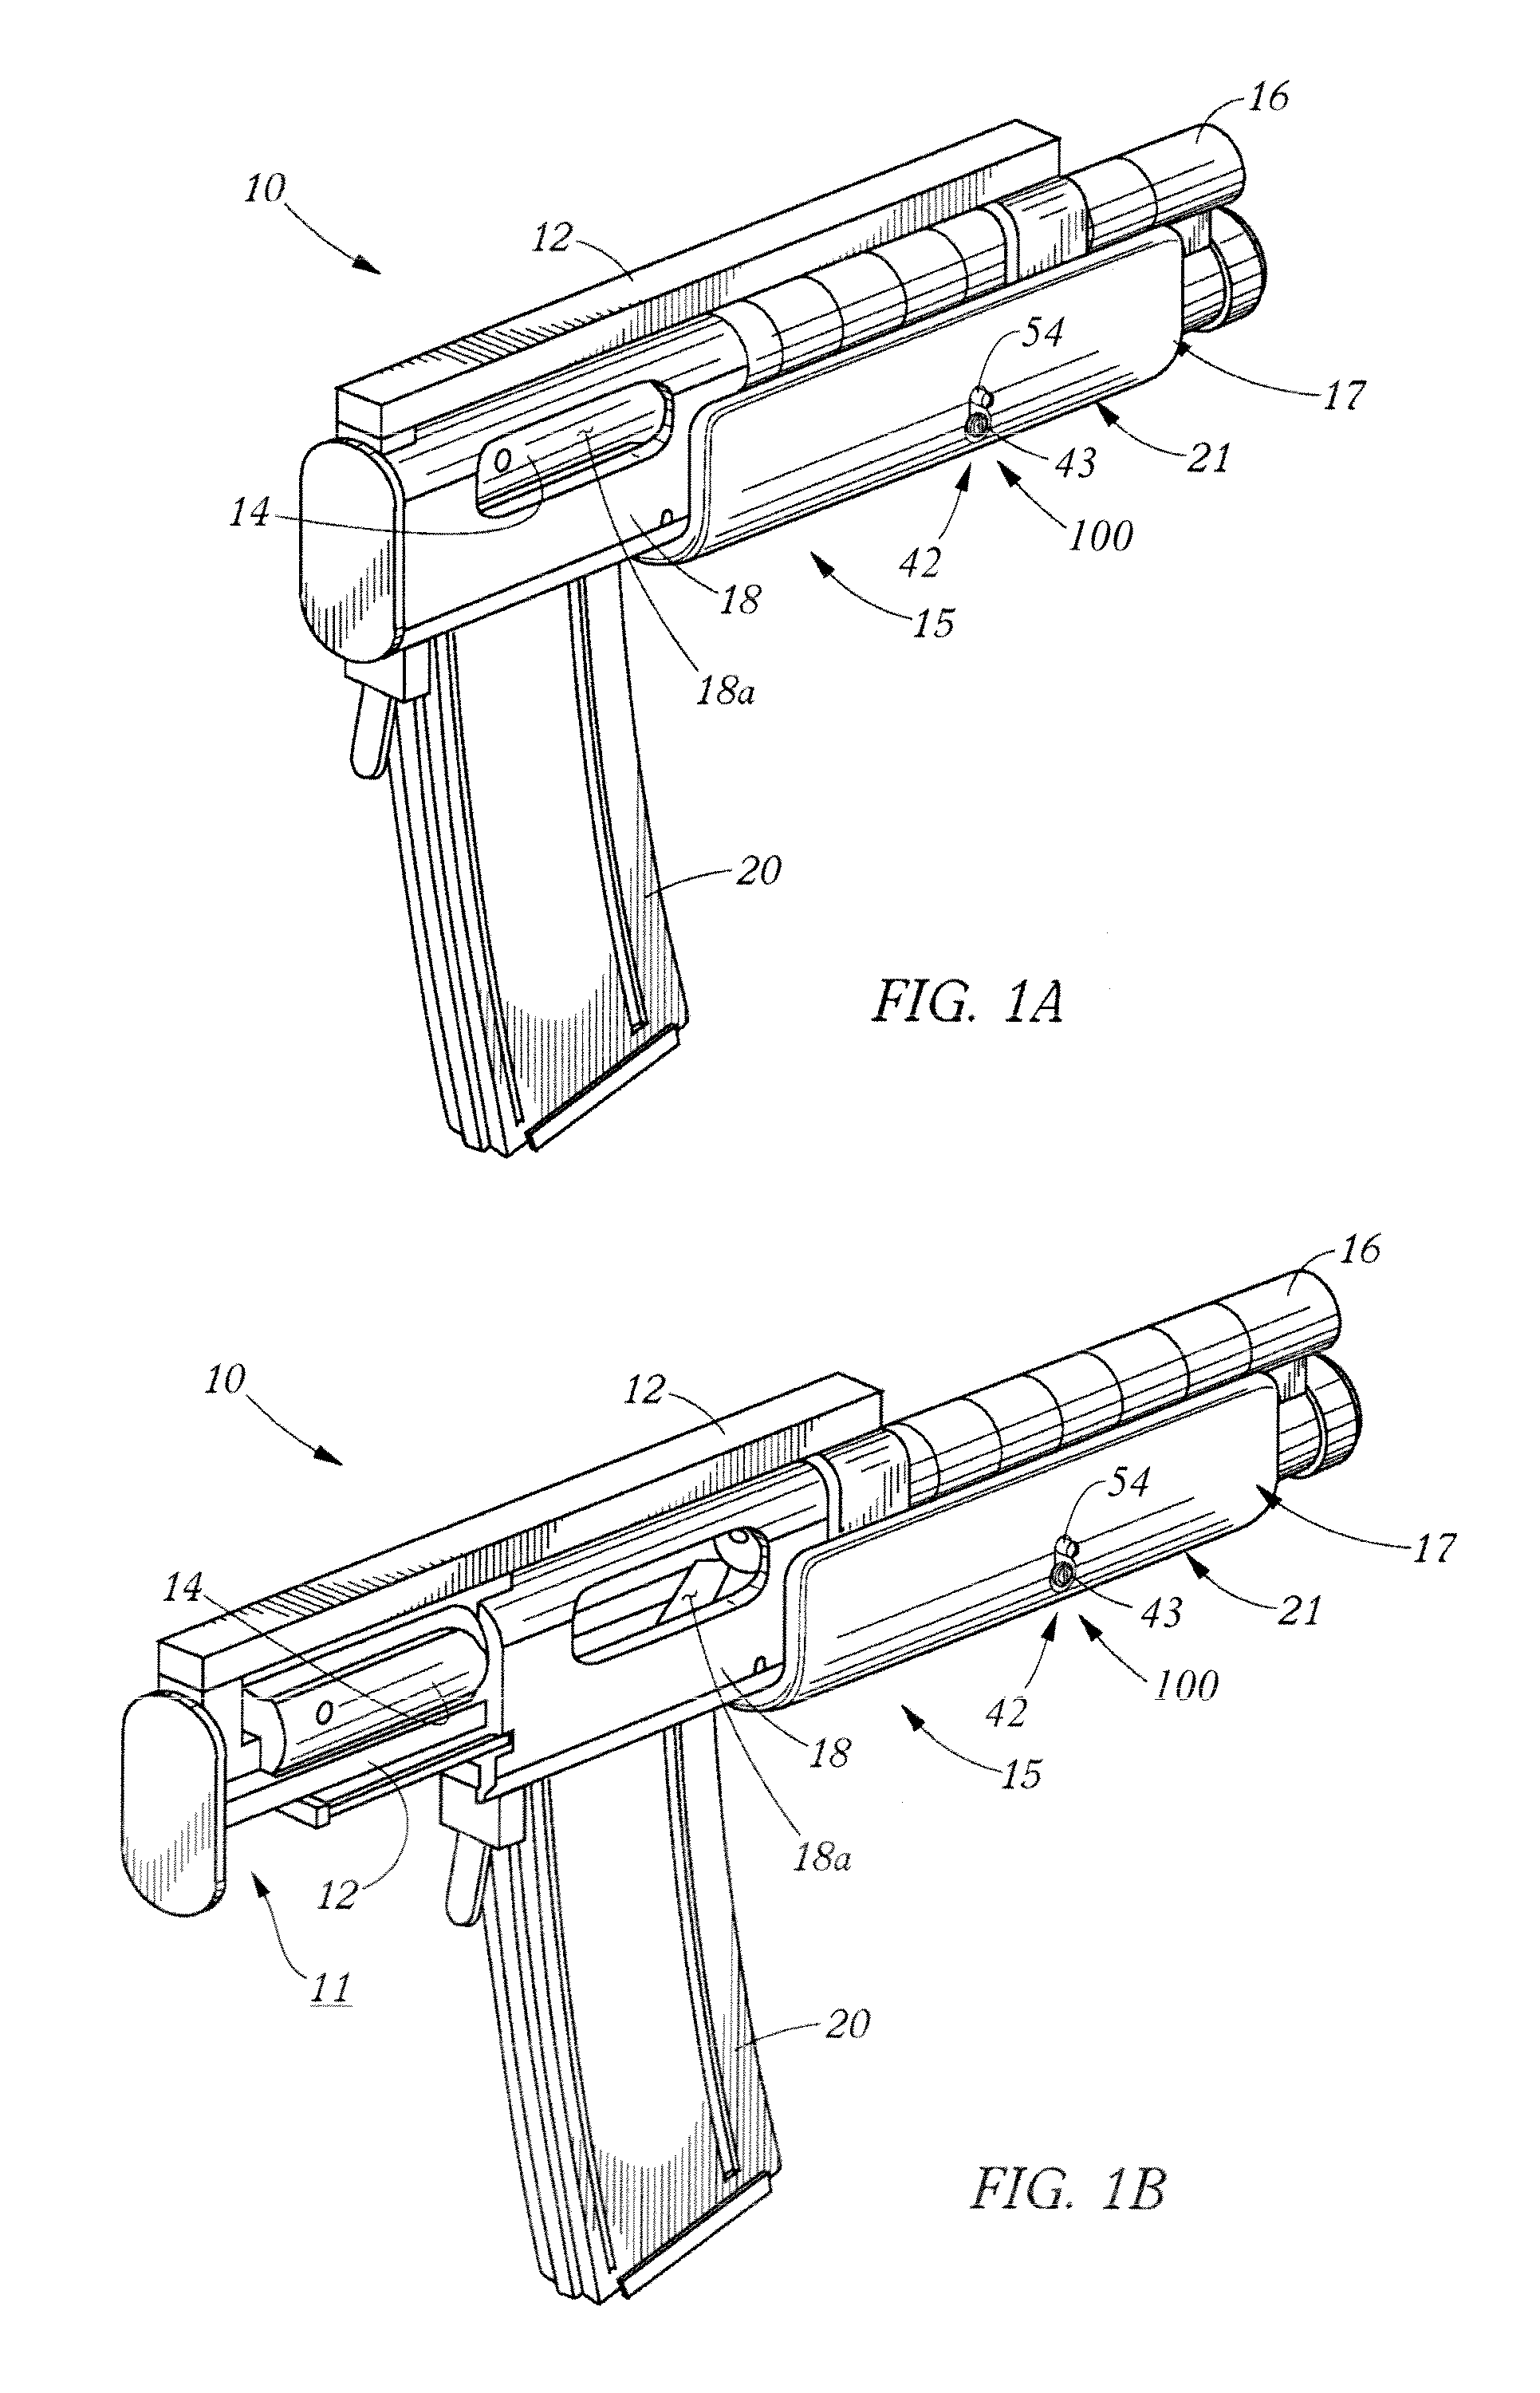 Forwardly-placed firearm fire control assembly